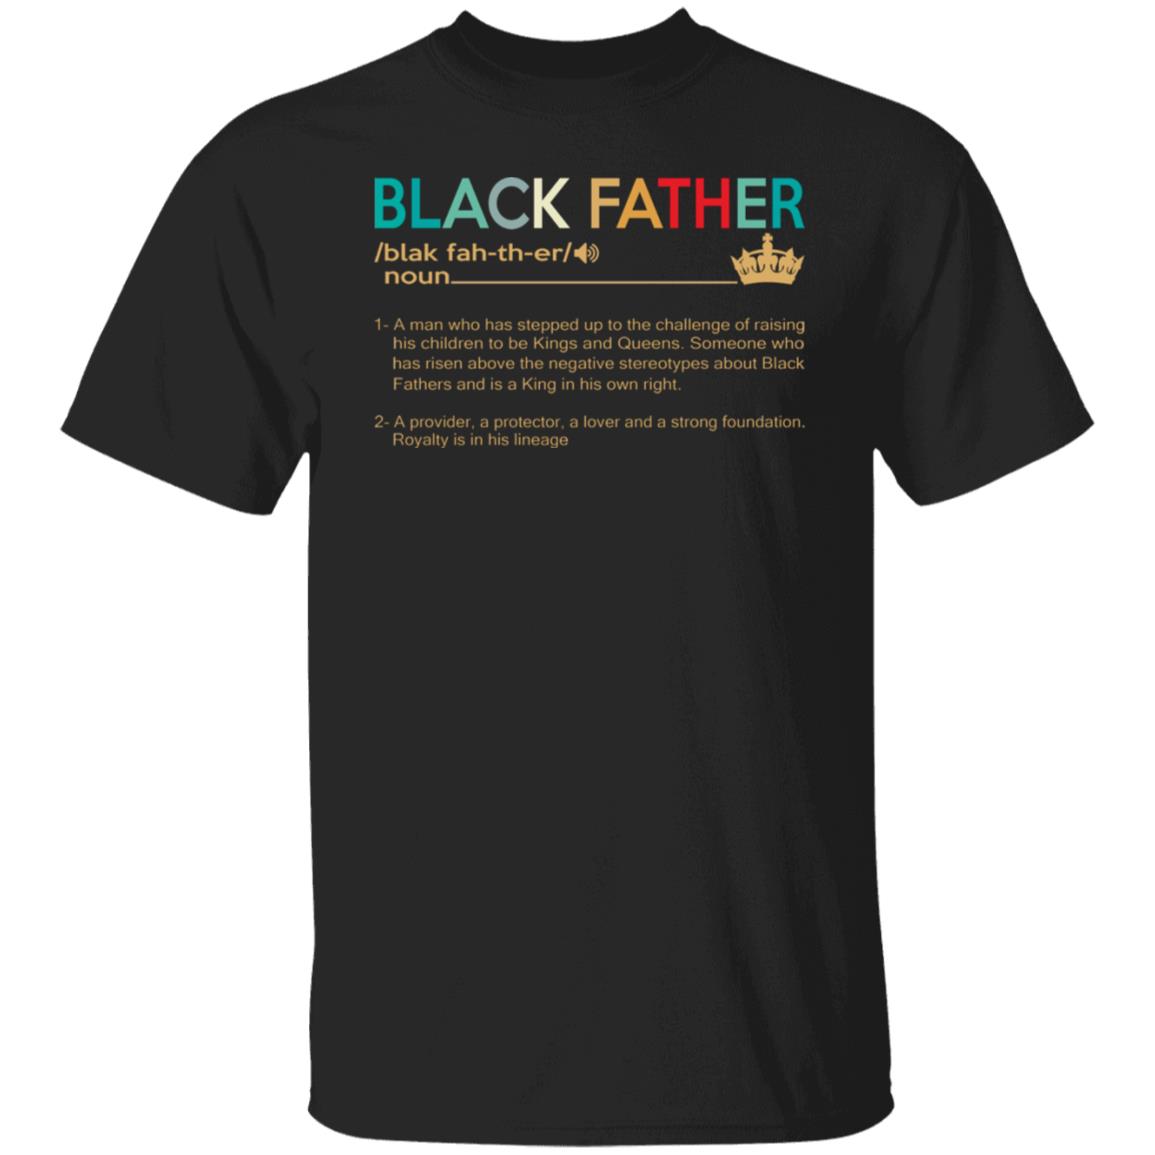 Black Father - A Man Who Has Stepped Up To The Challenge Of Raising His ...